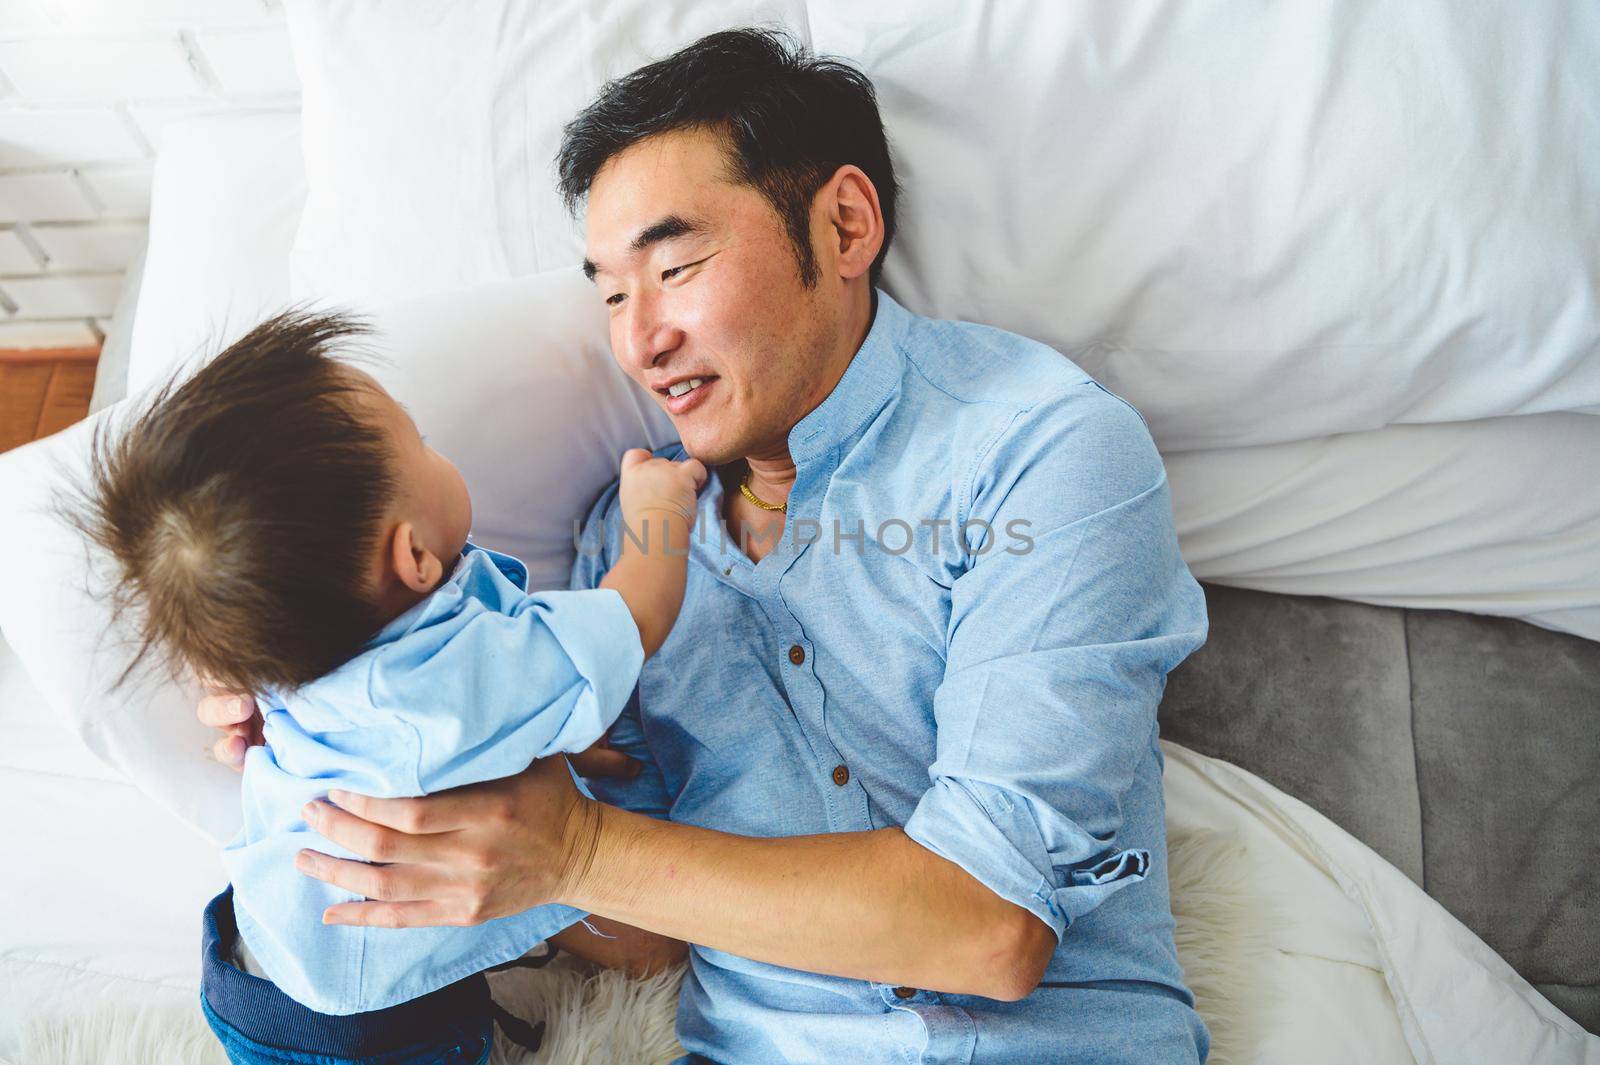 Asian father and son playing together on white bed in bedroom in the morning. Two people having leisure time at home. People lifestyle concept.